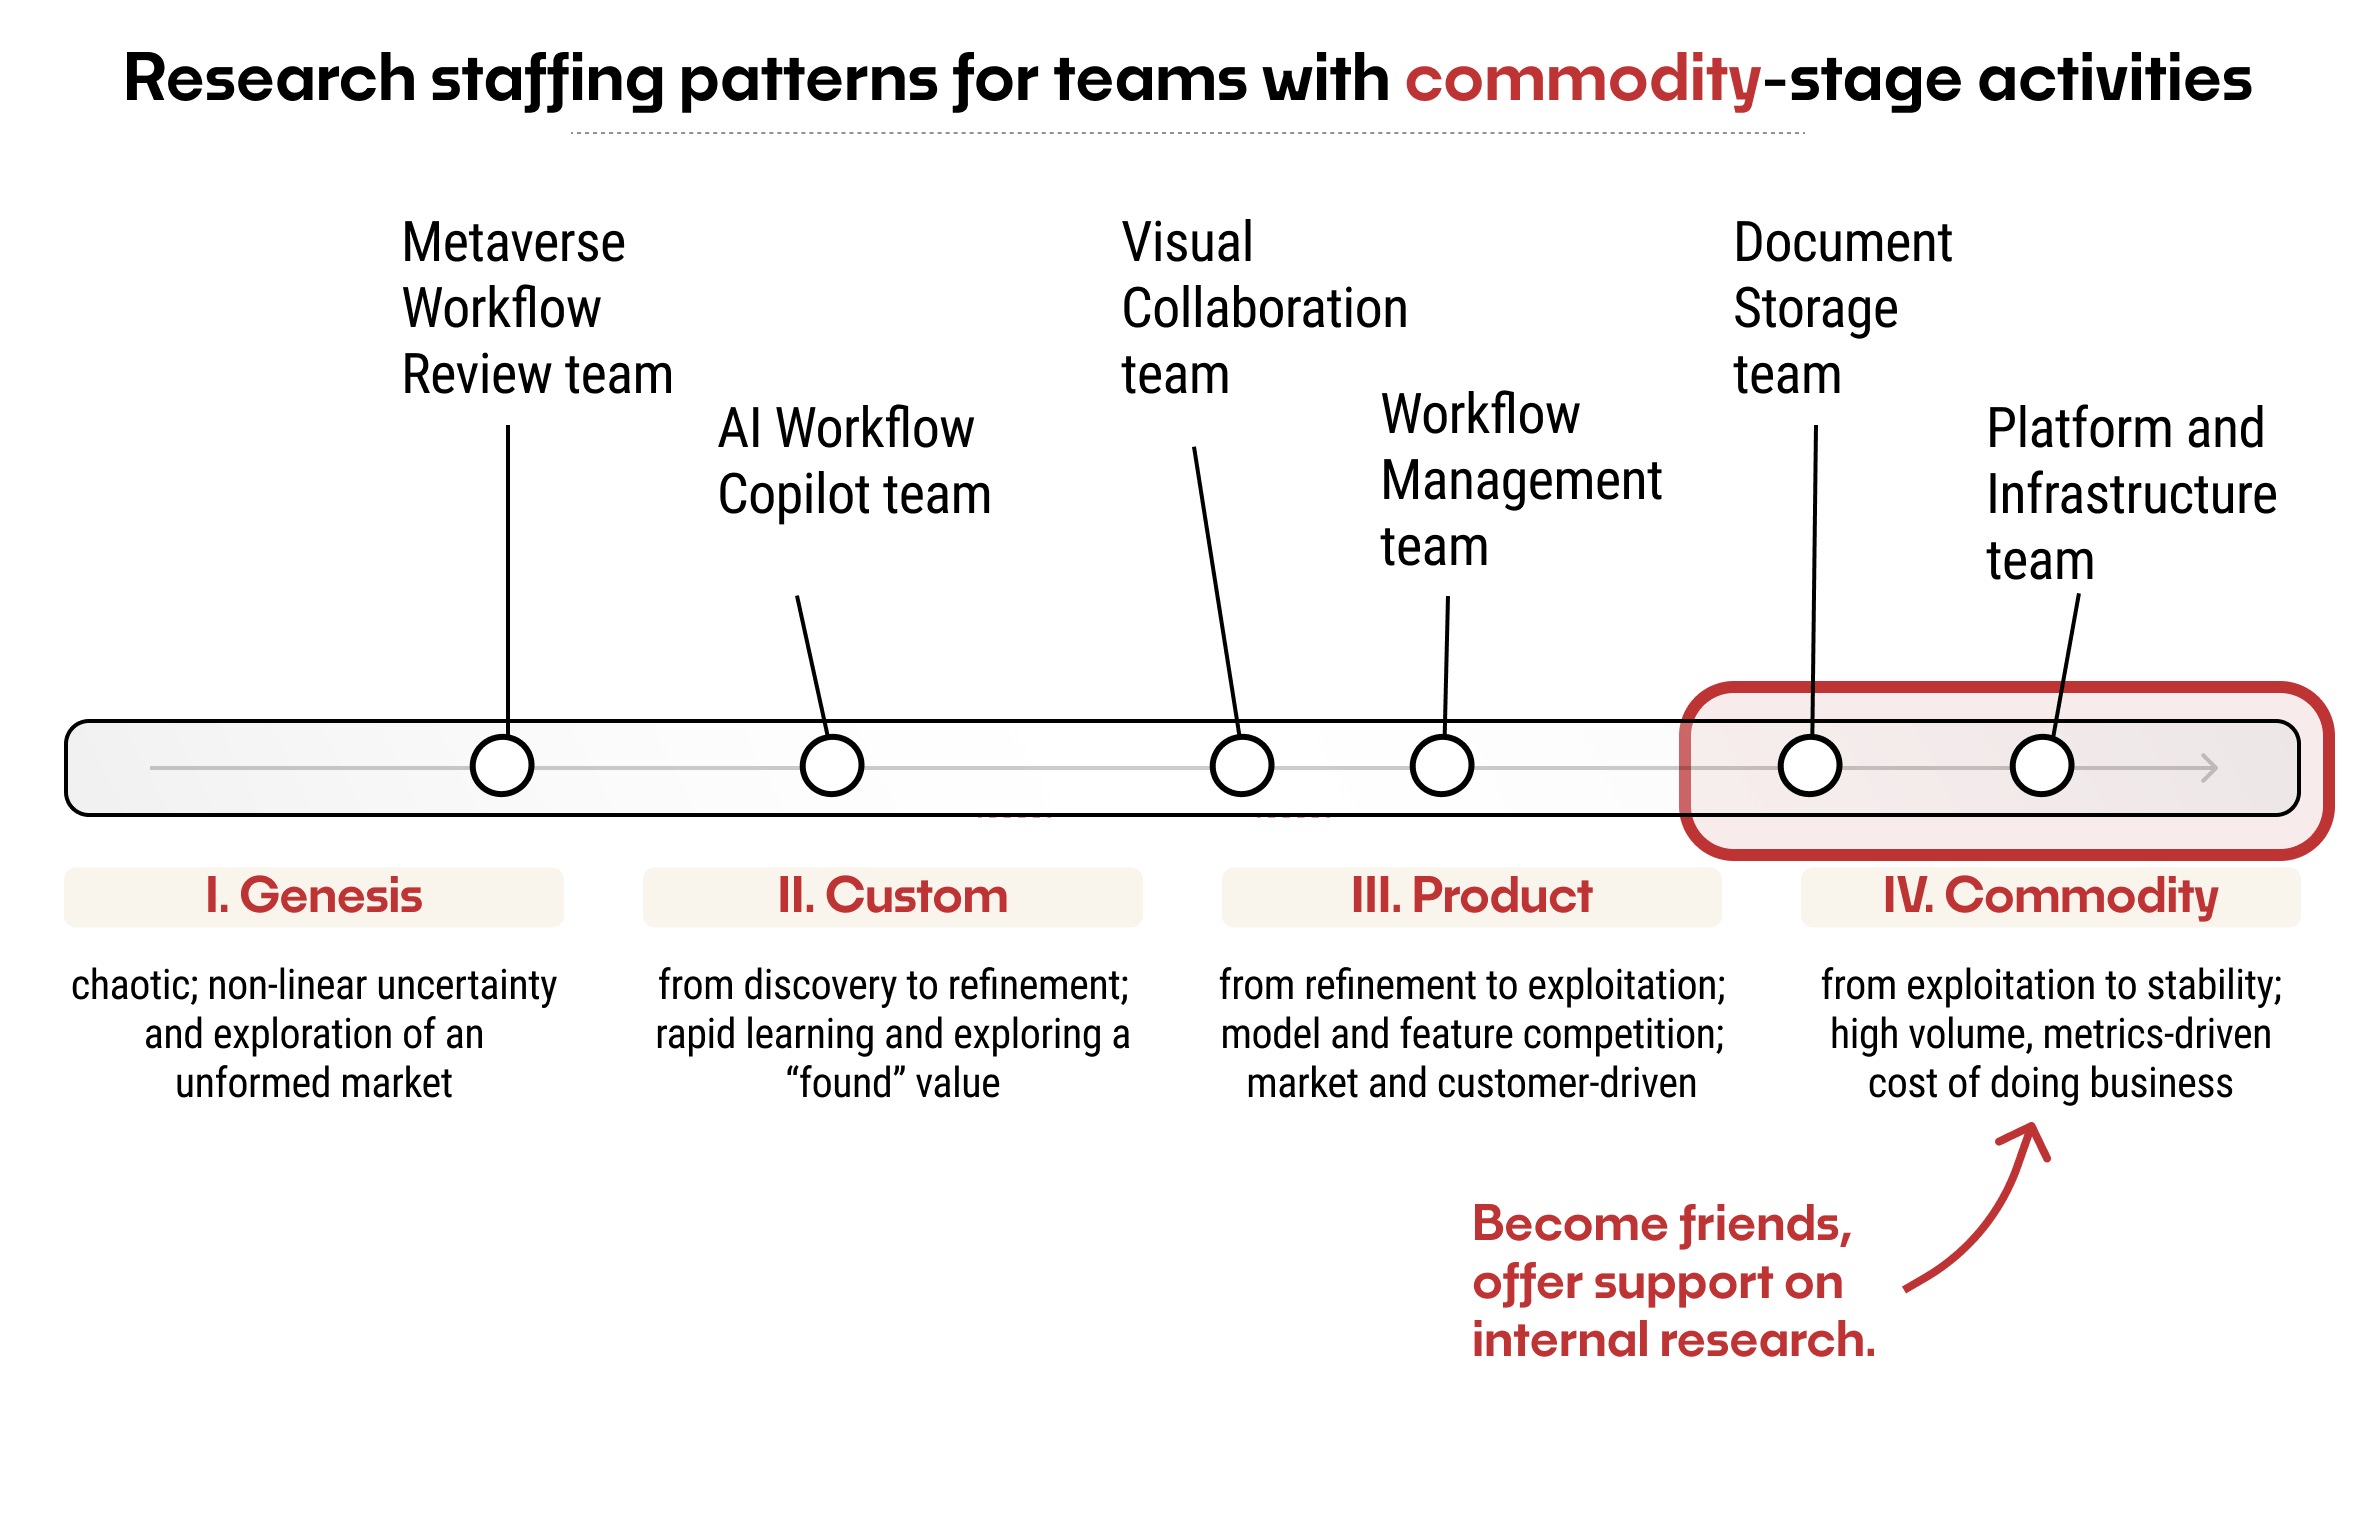 The same spectrum of teams as above, with the commodity stage highlighted, and a recommendation to: Become friends, offer support on internal research.